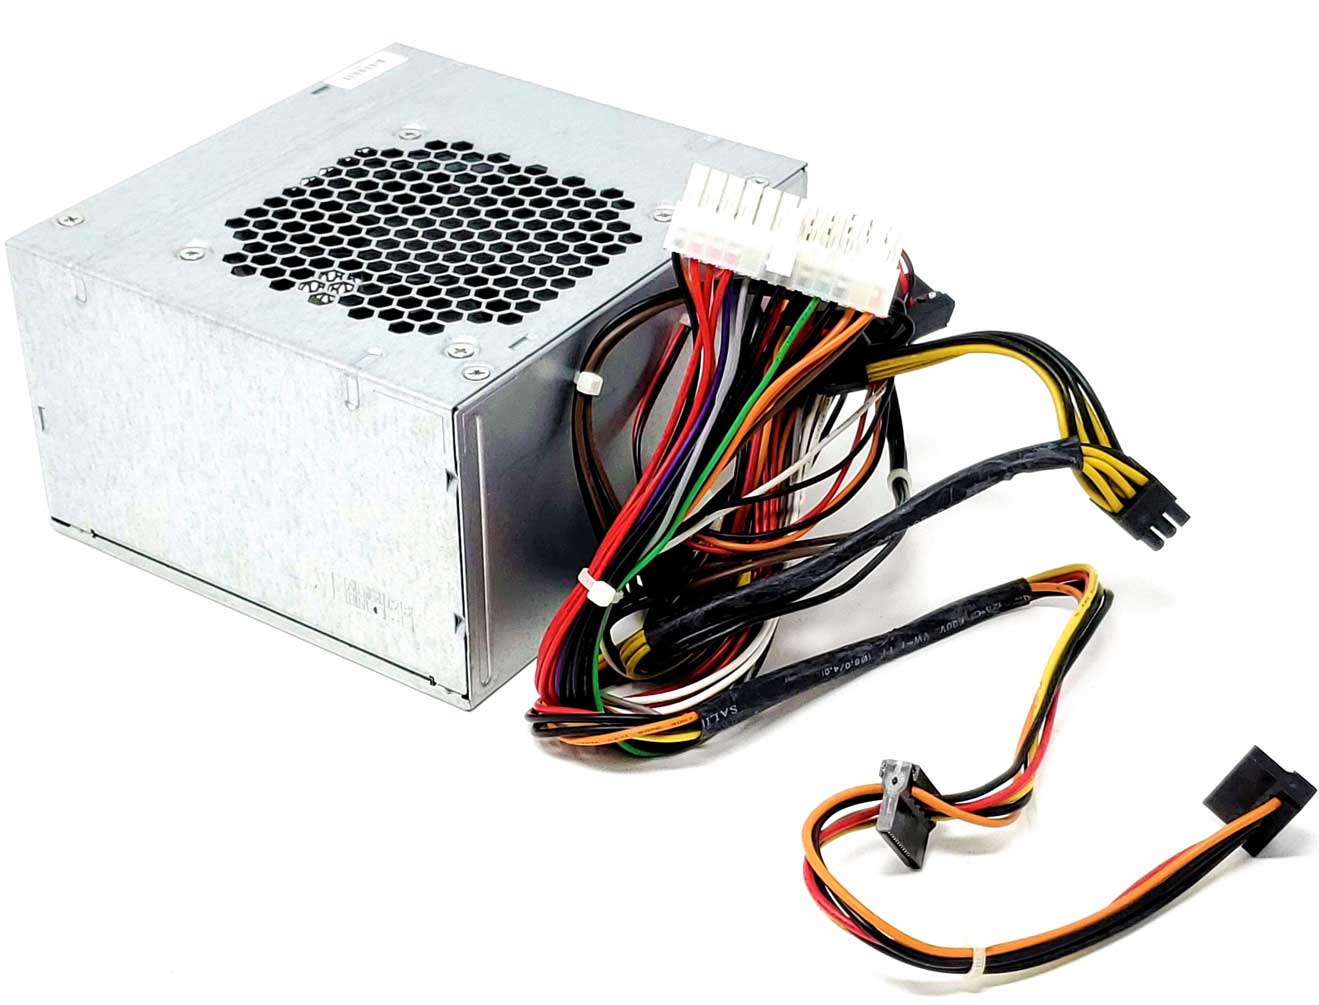 Dell 460W Advanced Technology Extended Power Supply